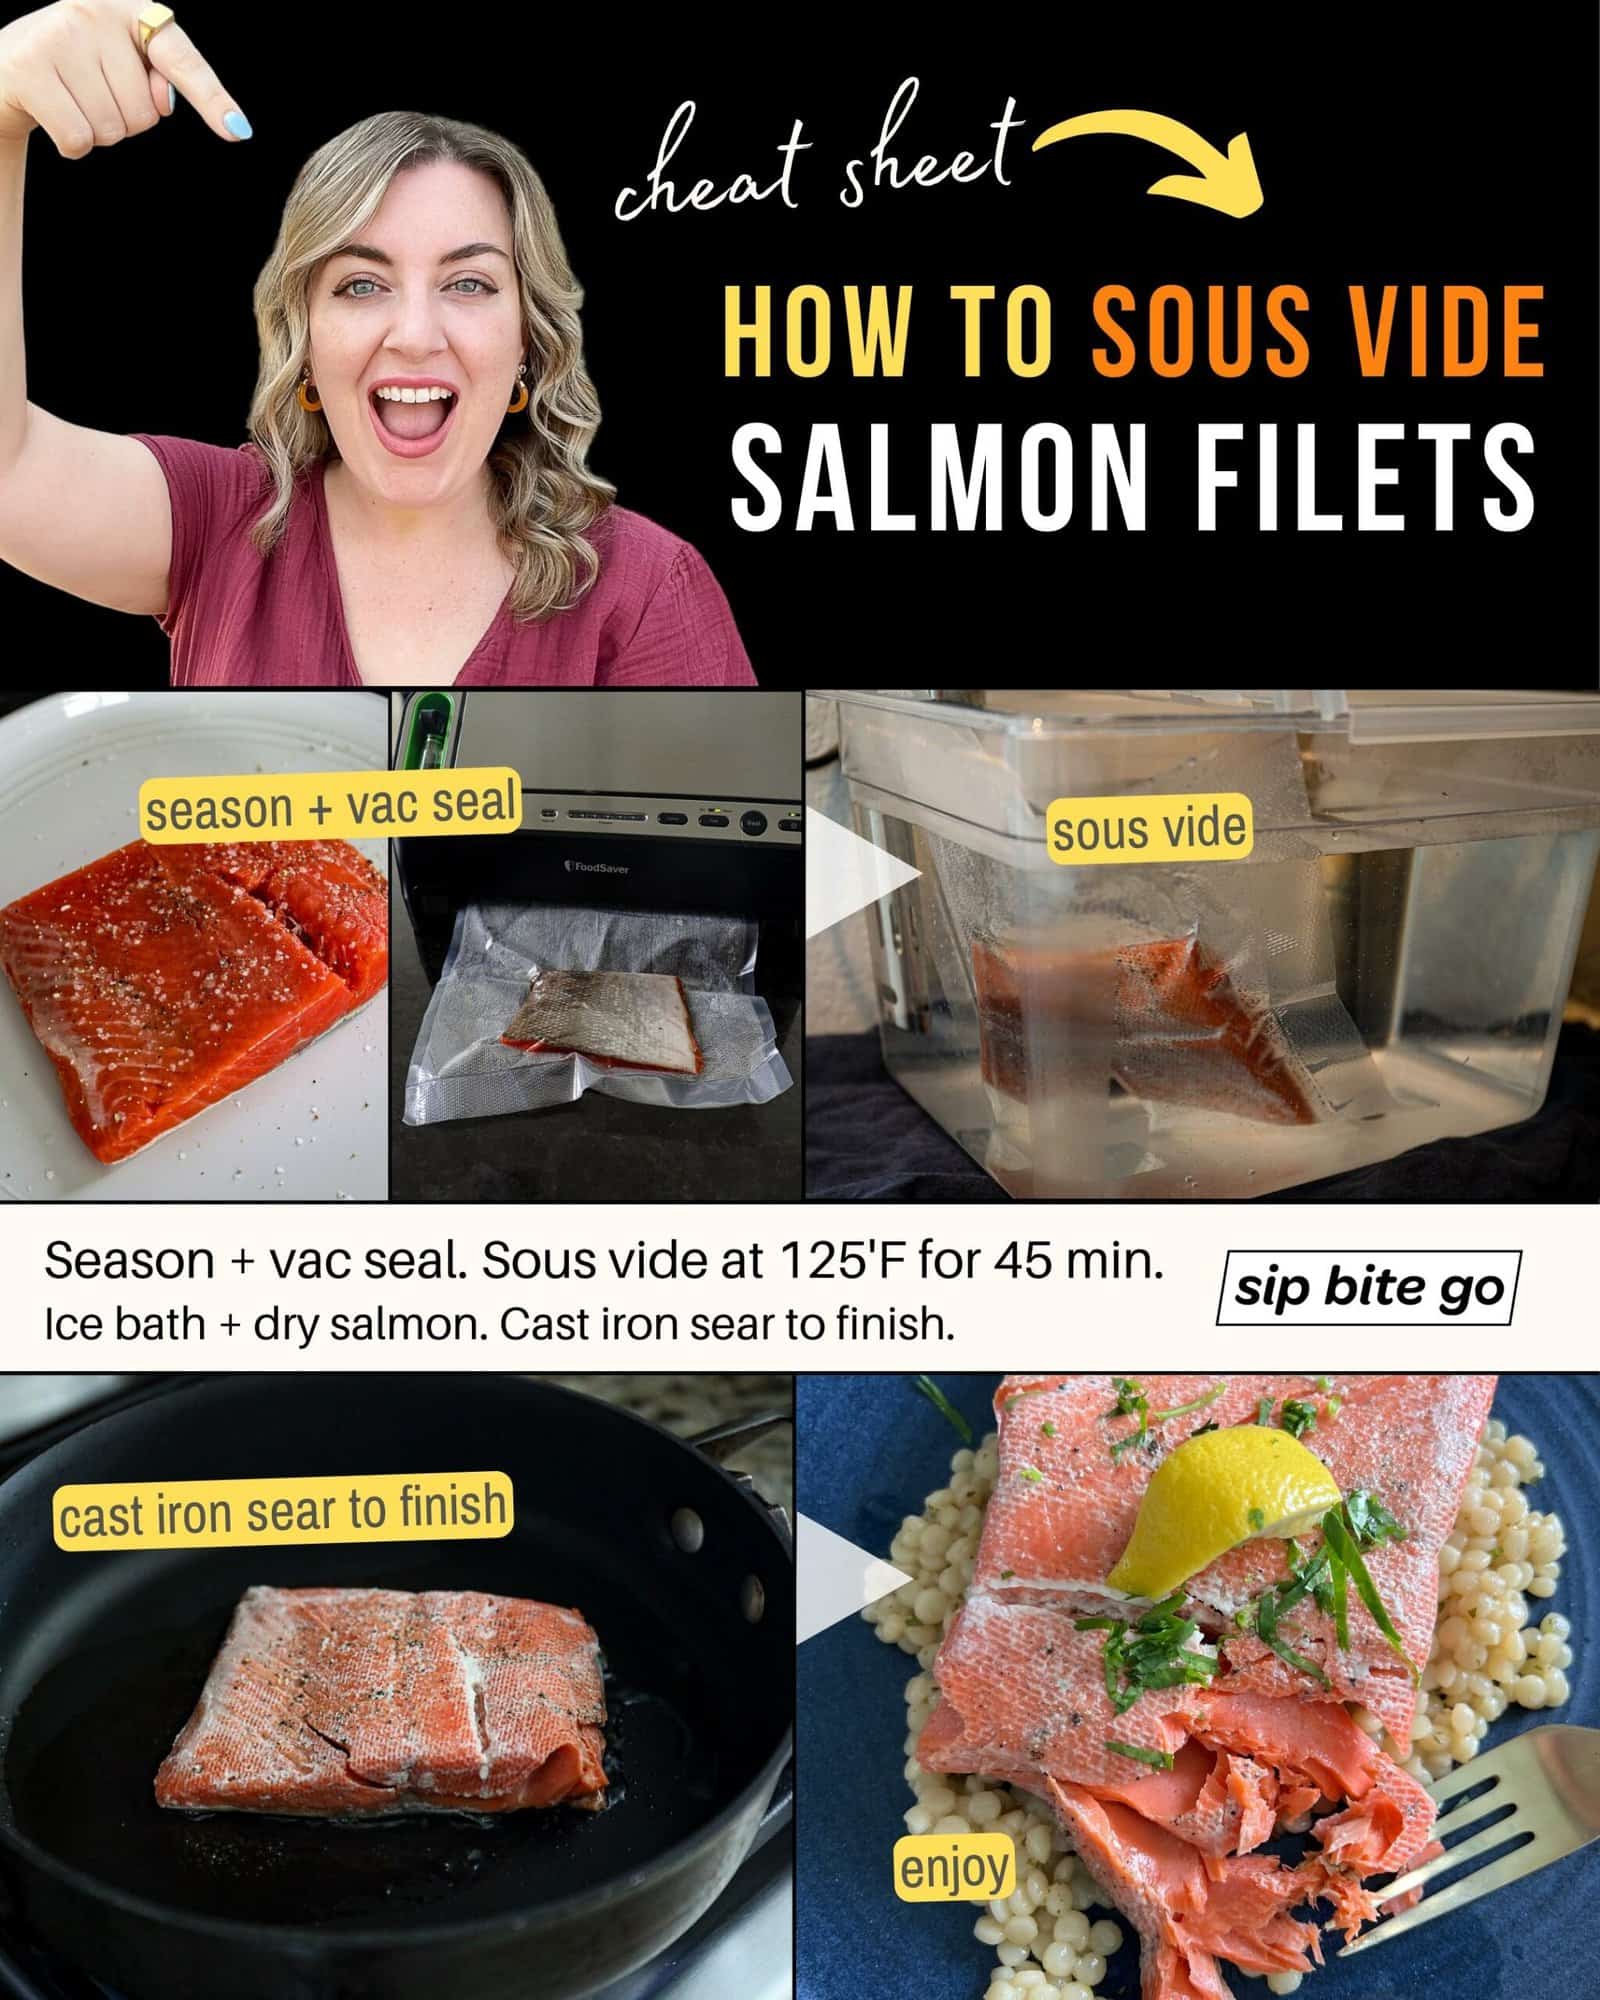 Infographic demonstrating How To Sous Vide Salmon Filets with Jenna Passaro food blogger from Sip Bite Go